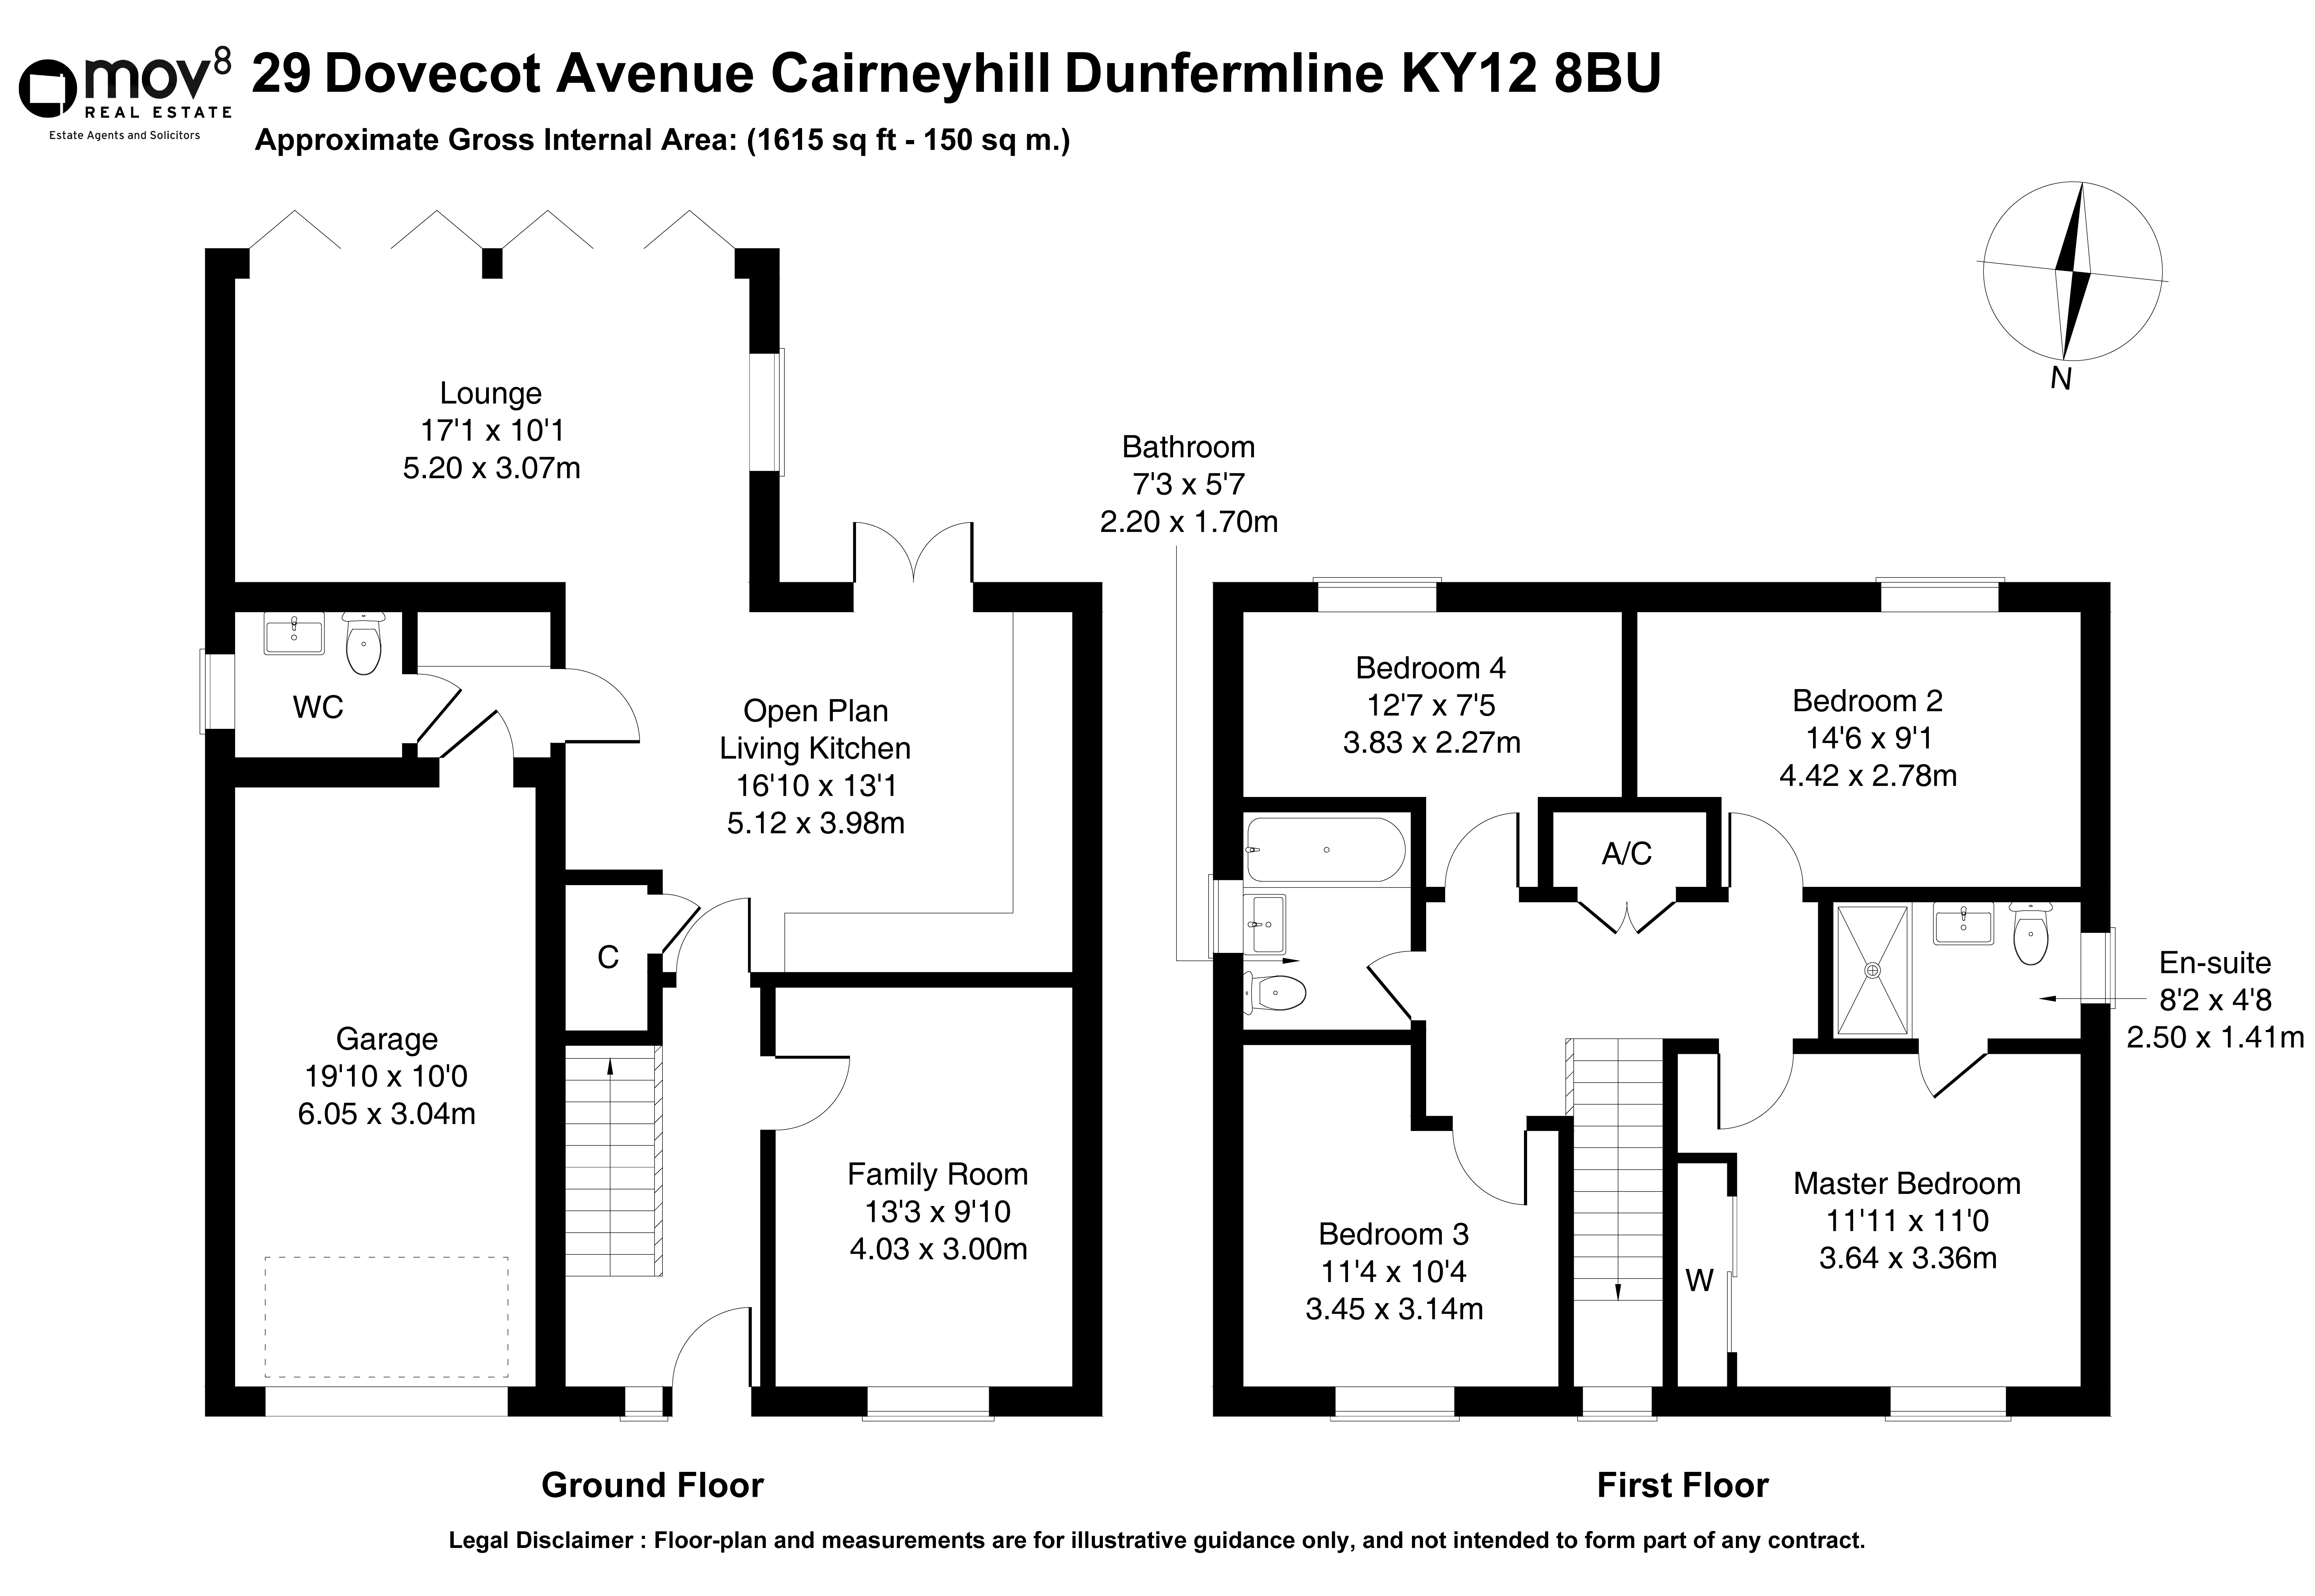 Floorplan 1 of  29 Dovecot Avenue, Cairneyhill, Dunfermline, Fife, KY12 8BU